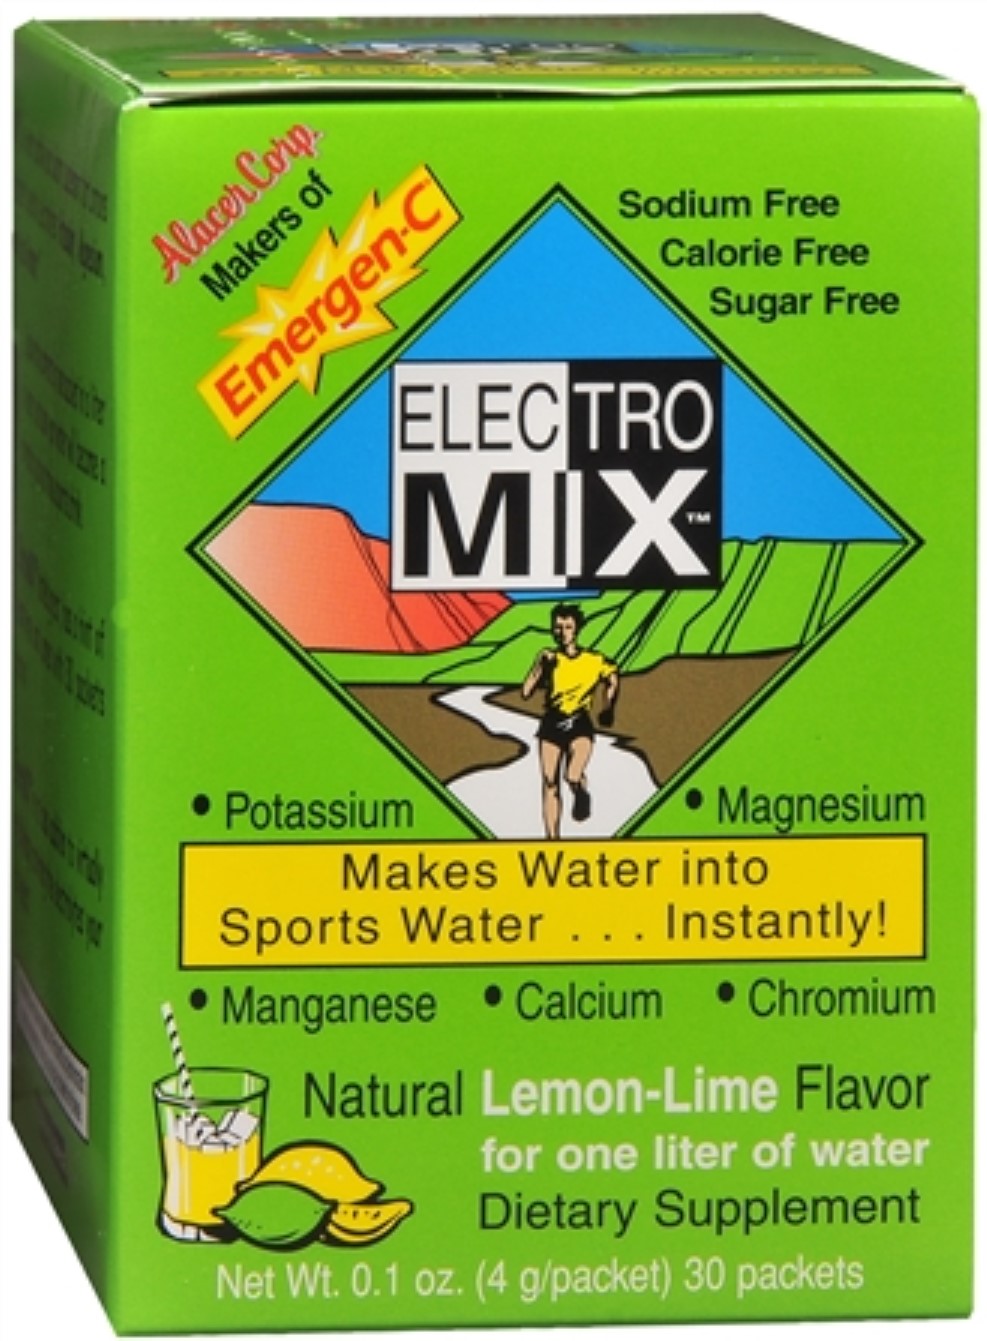 Emergen-C Electro Mix Packets Lemon-Lime Flavor 30 Each (Pack of 3) - image 1 of 1